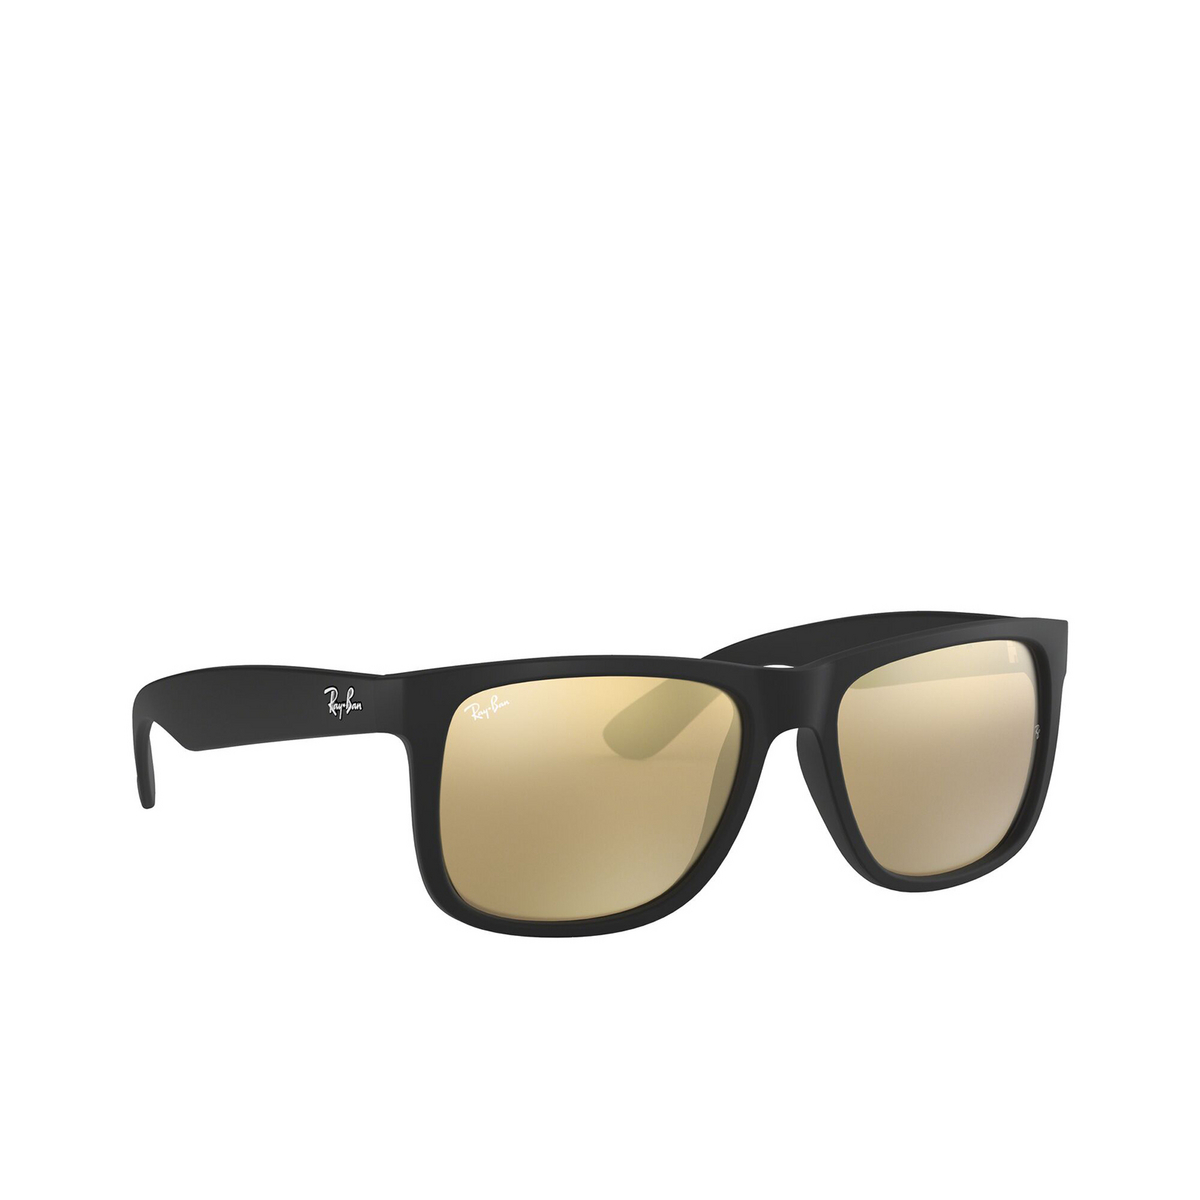 Ray-Ban® Square Sunglasses: RB4165 Justin color 622/5A Rubber Black - three-quarters view